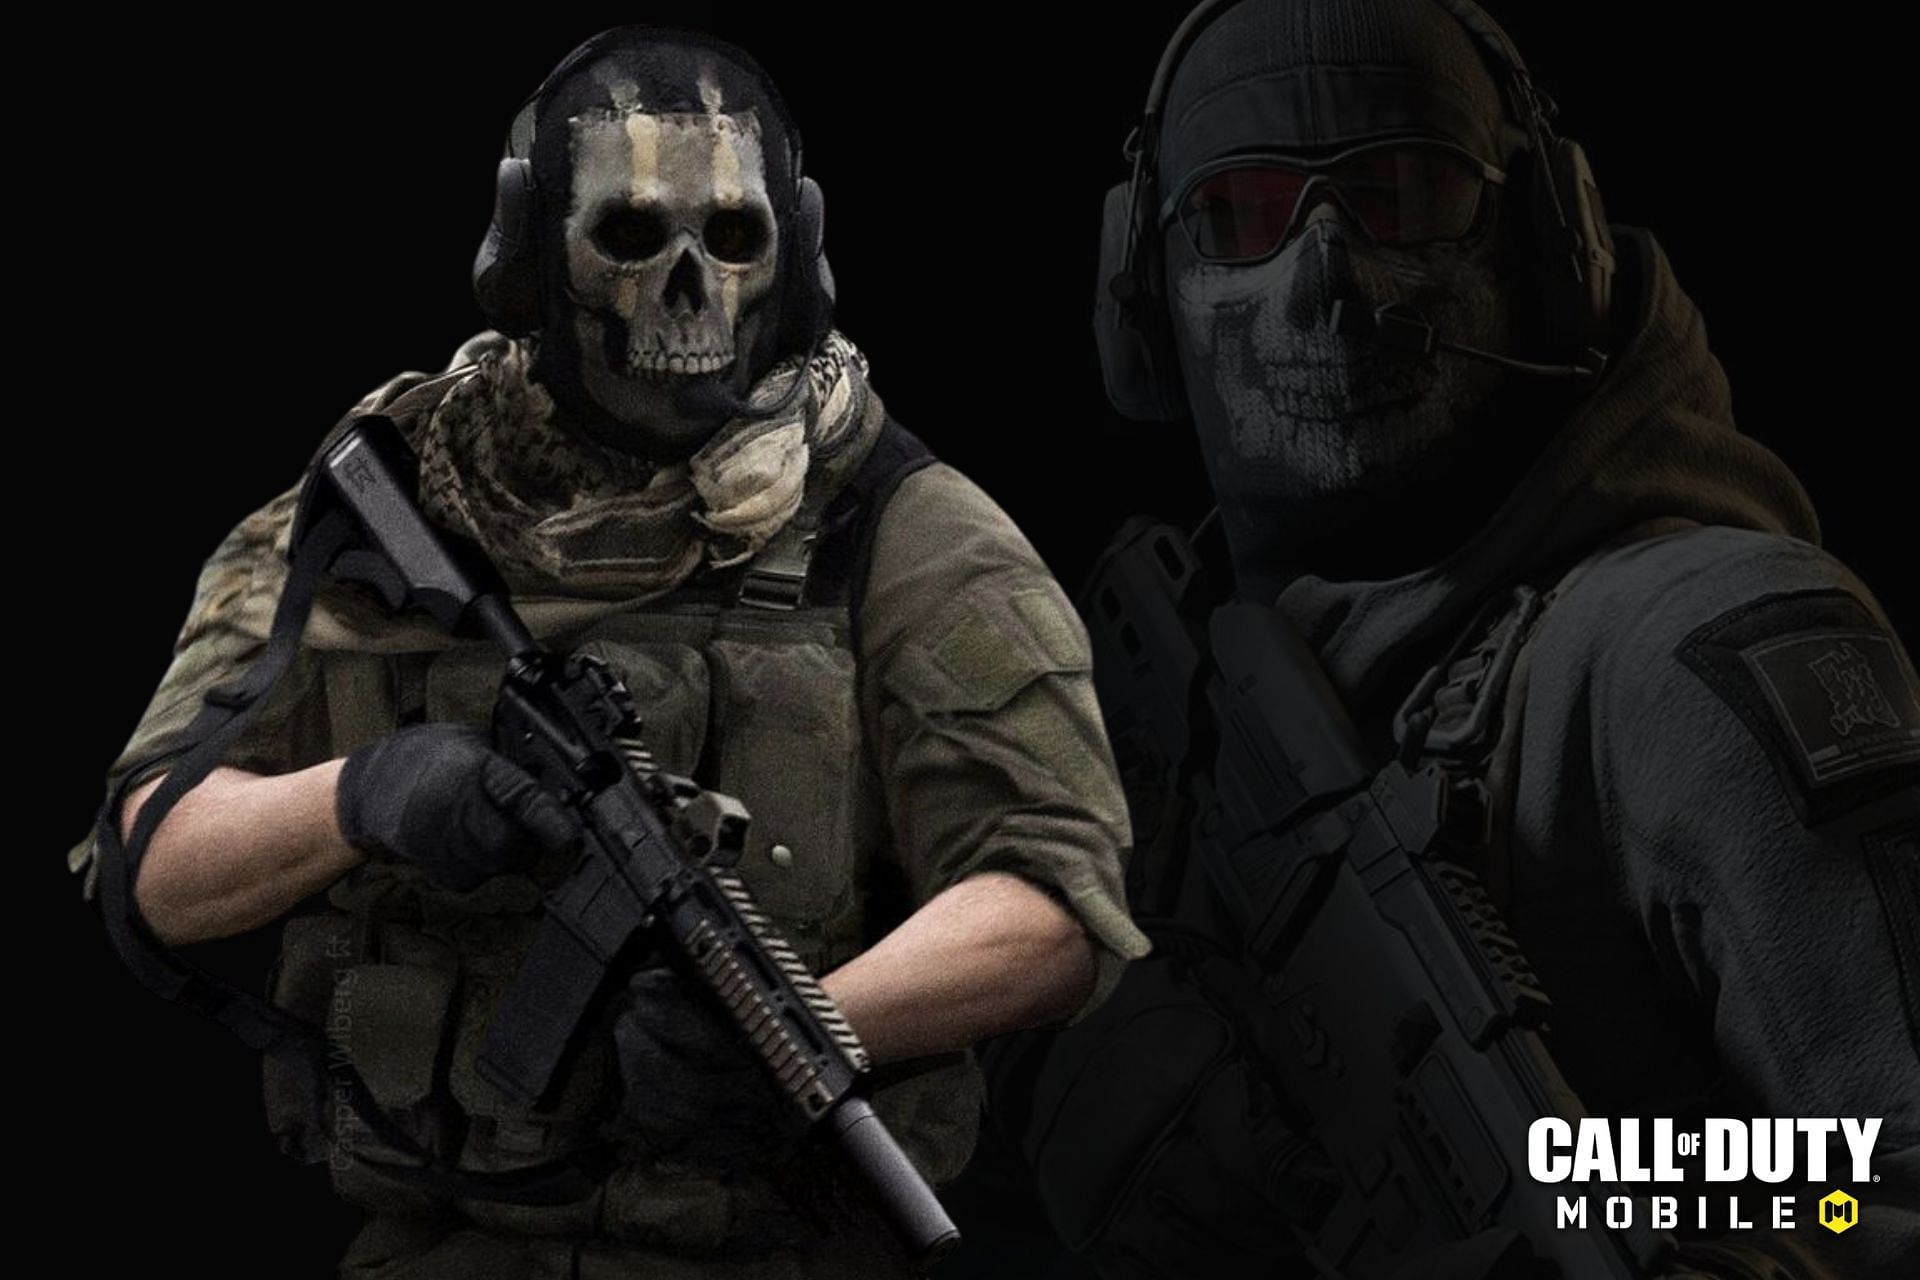 Call of Duty: Mobile (Image by Activision)